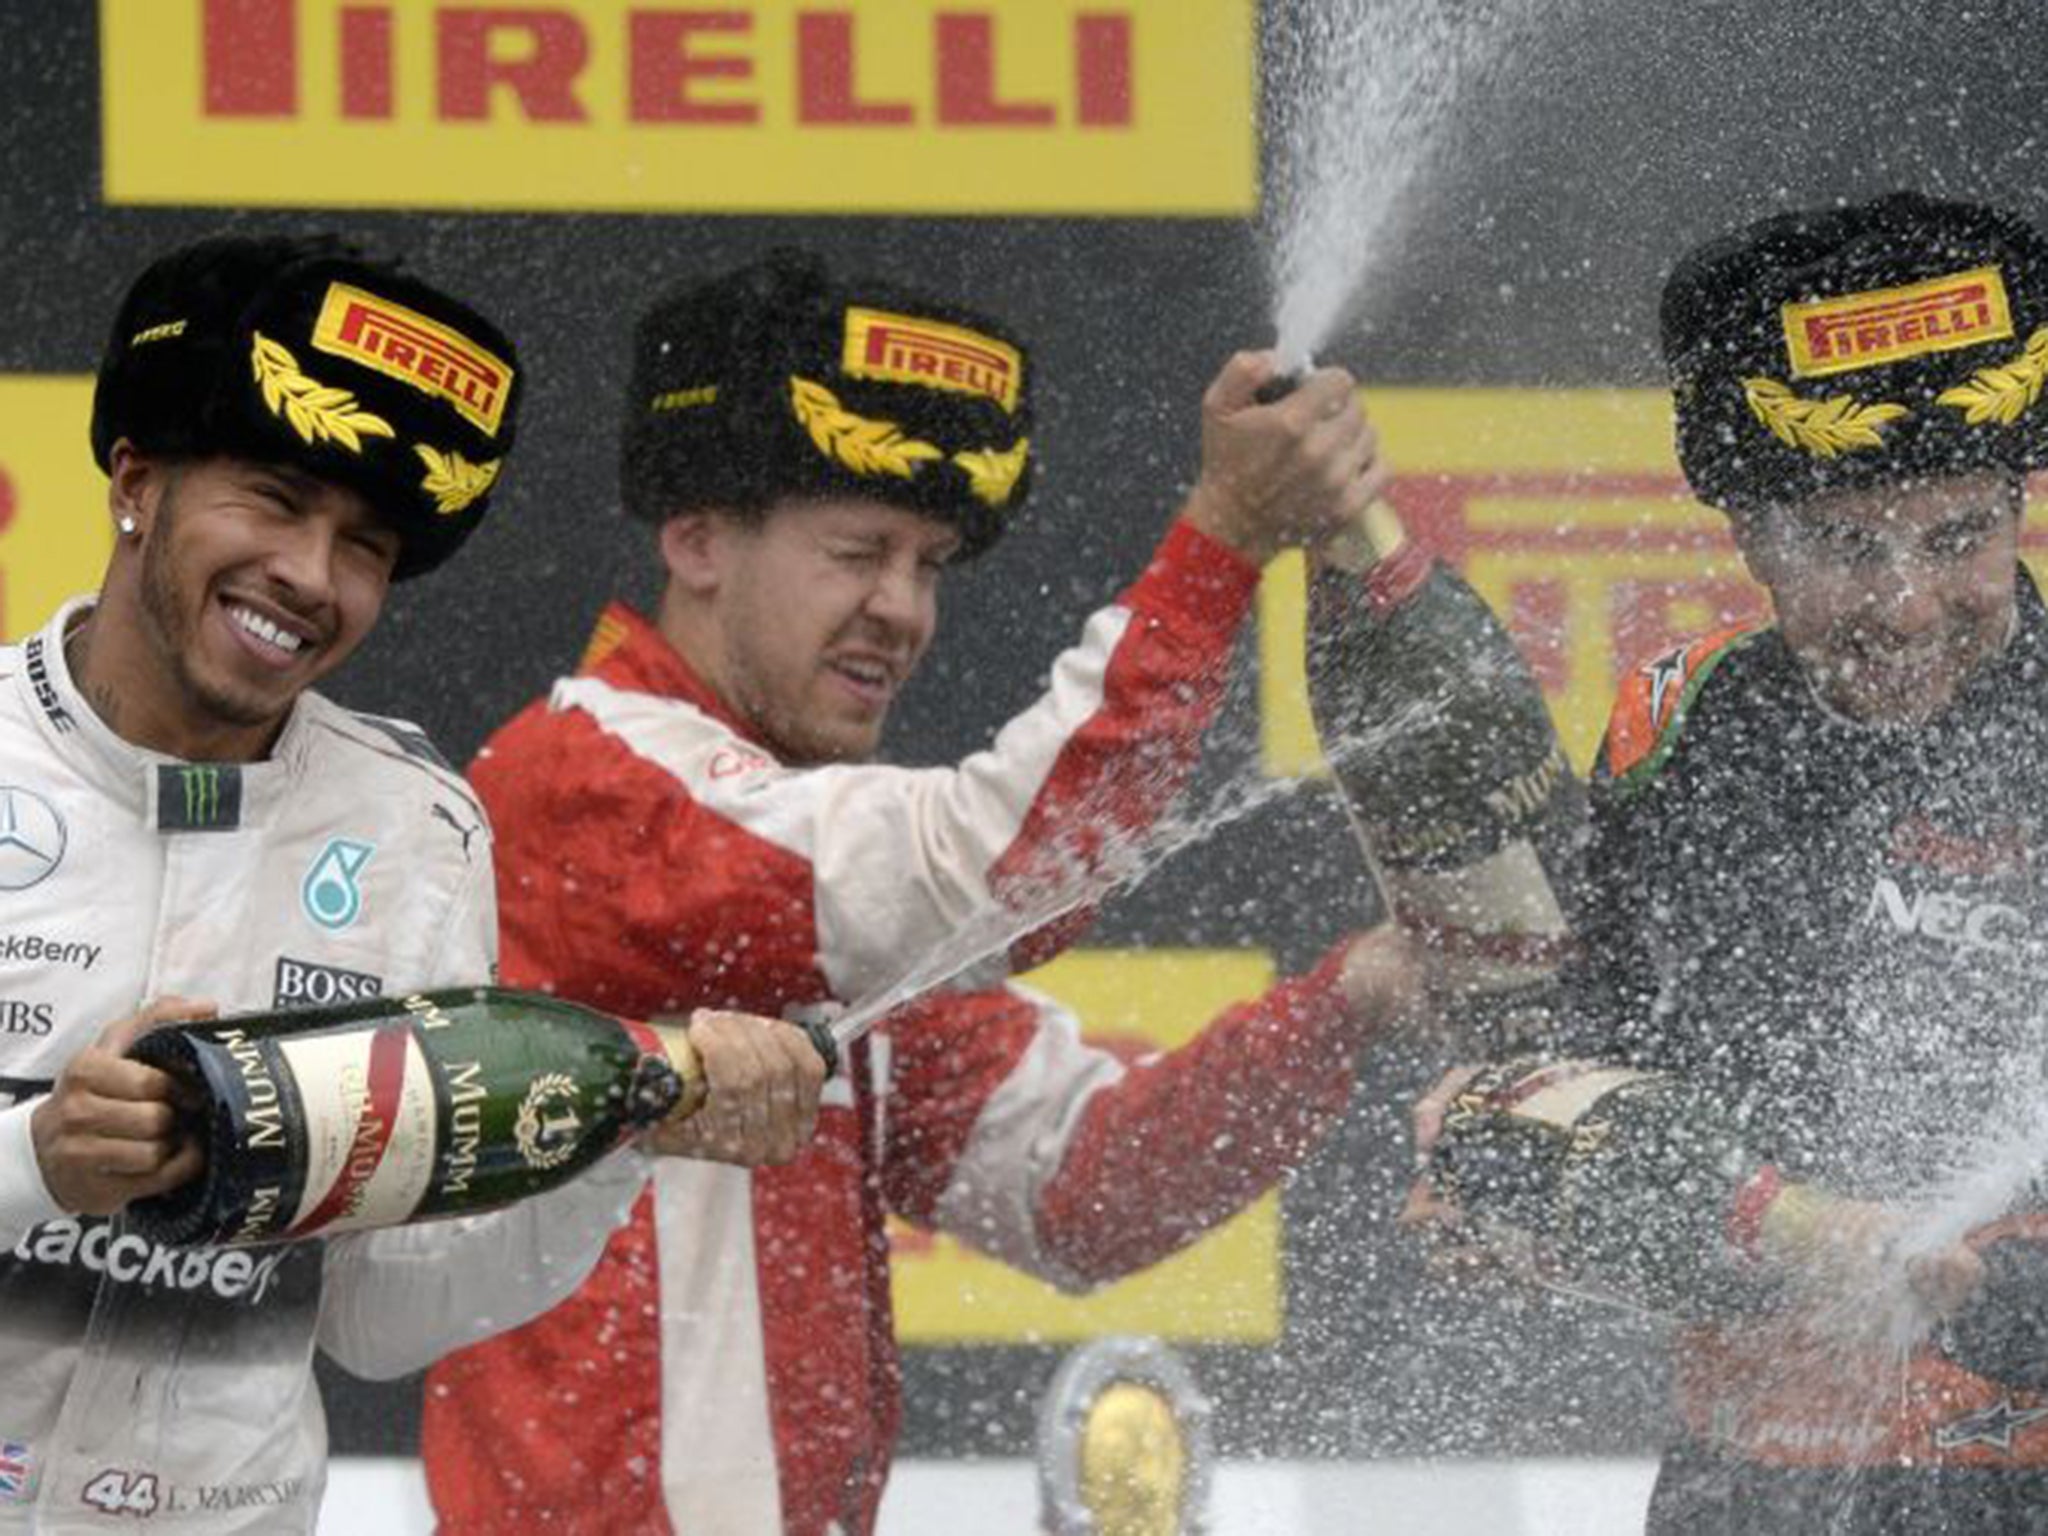 Lewis Hamilton, left, celebrates his Russian Grand Prix win, which reinforced the ‘processional’ dominance he has often enjoyed this season